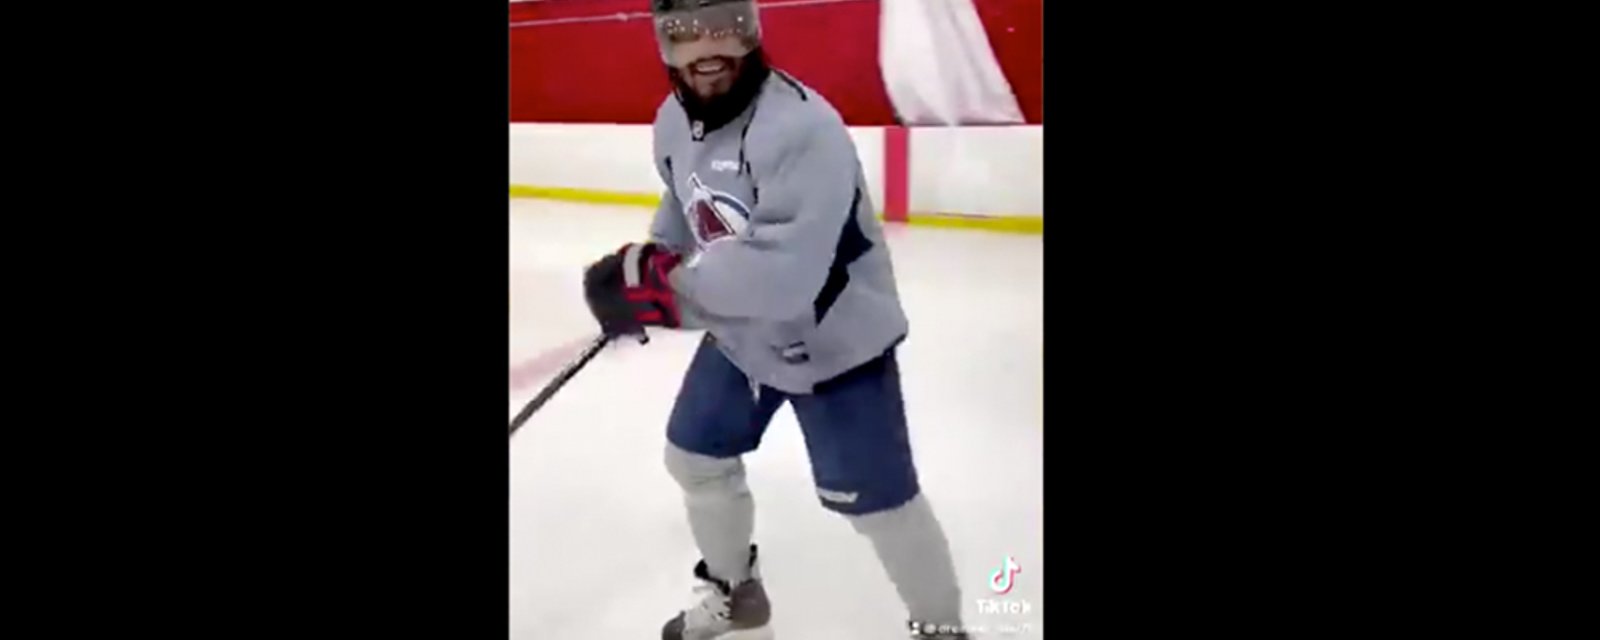 Marshawn Lynch, rebranded Shawn Gretzky, laces up the skates and hits the ice